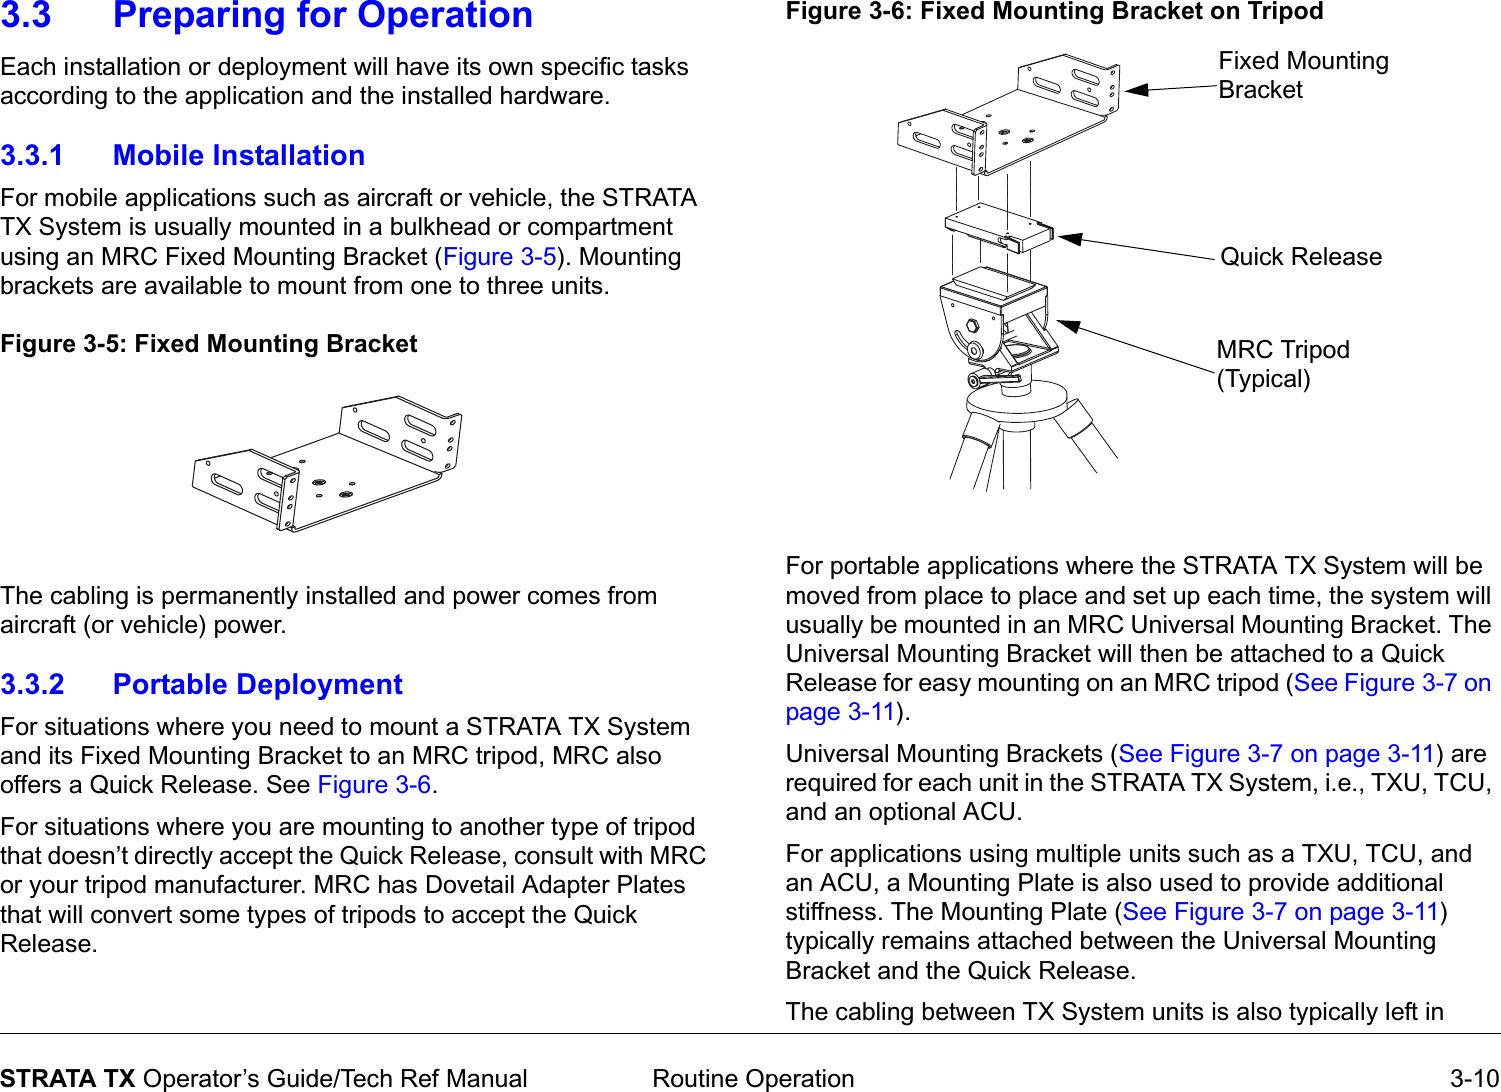  Routine Operation 3-10STRATA TX Operator’s Guide/Tech Ref Manual3.3 Preparing for OperationEach installation or deployment will have its own specific tasks according to the application and the installed hardware.  3.3.1 Mobile InstallationFor mobile applications such as aircraft or vehicle, the STRATA TX System is usually mounted in a bulkhead or compartment using an MRC Fixed Mounting Bracket (Figure 3-5). Mounting brackets are available to mount from one to three units.Figure 3-5: Fixed Mounting BracketThe cabling is permanently installed and power comes from aircraft (or vehicle) power.3.3.2 Portable DeploymentFor situations where you need to mount a STRATA TX System and its Fixed Mounting Bracket to an MRC tripod, MRC also offers a Quick Release. See Figure 3-6.For situations where you are mounting to another type of tripod that doesn’t directly accept the Quick Release, consult with MRC or your tripod manufacturer. MRC has Dovetail Adapter Plates that will convert some types of tripods to accept the Quick Release.Figure 3-6: Fixed Mounting Bracket on TripodFor portable applications where the STRATA TX System will be moved from place to place and set up each time, the system will usually be mounted in an MRC Universal Mounting Bracket. The Universal Mounting Bracket will then be attached to a Quick Release for easy mounting on an MRC tripod (See Figure 3-7 on page 3-11). Universal Mounting Brackets (See Figure 3-7 on page 3-11) are required for each unit in the STRATA TX System, i.e., TXU, TCU, and an optional ACU. For applications using multiple units such as a TXU, TCU, and an ACU, a Mounting Plate is also used to provide additional stiffness. The Mounting Plate (See Figure 3-7 on page 3-11) typically remains attached between the Universal Mounting Bracket and the Quick Release.The cabling between TX System units is also typically left in Fixed Mounting BracketQuick ReleaseMRC Tripod (Typical)